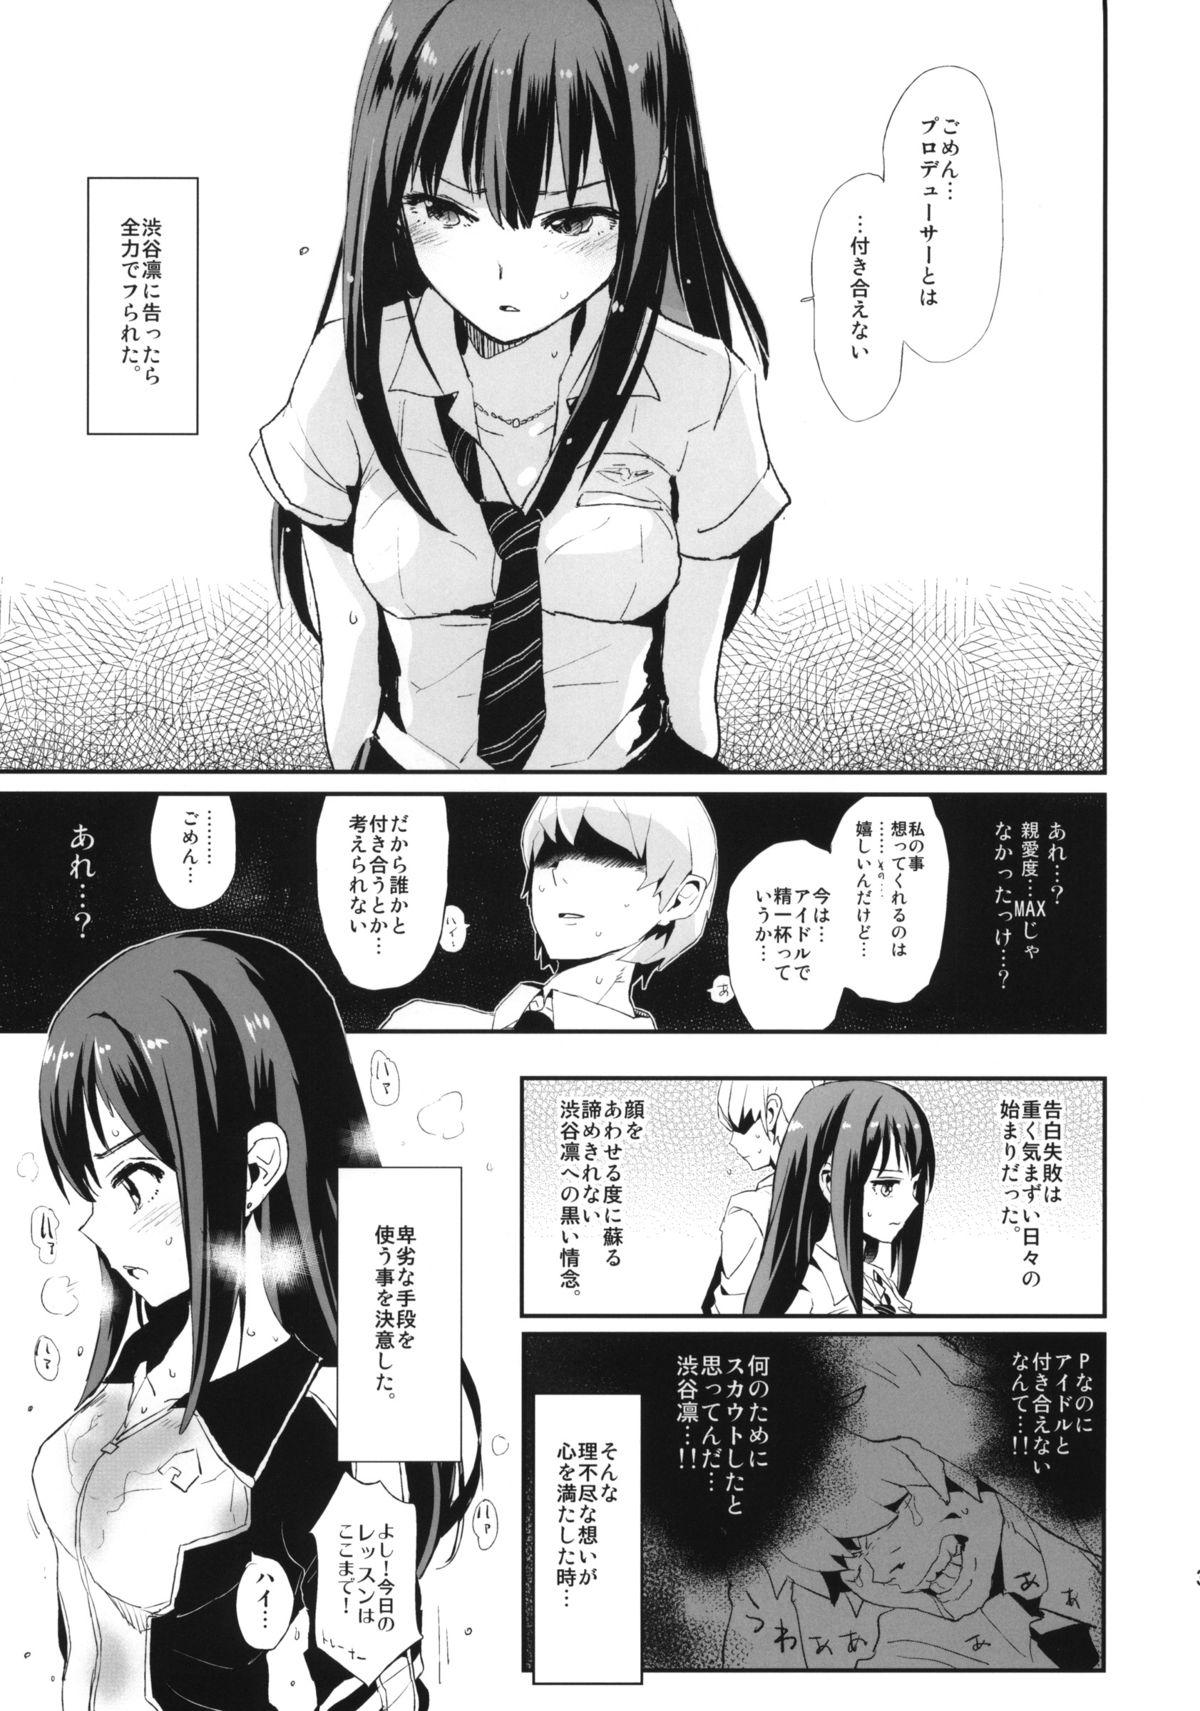 Family SUIMINSHIBURIN + Paper - The idolmaster Cute - Page 3